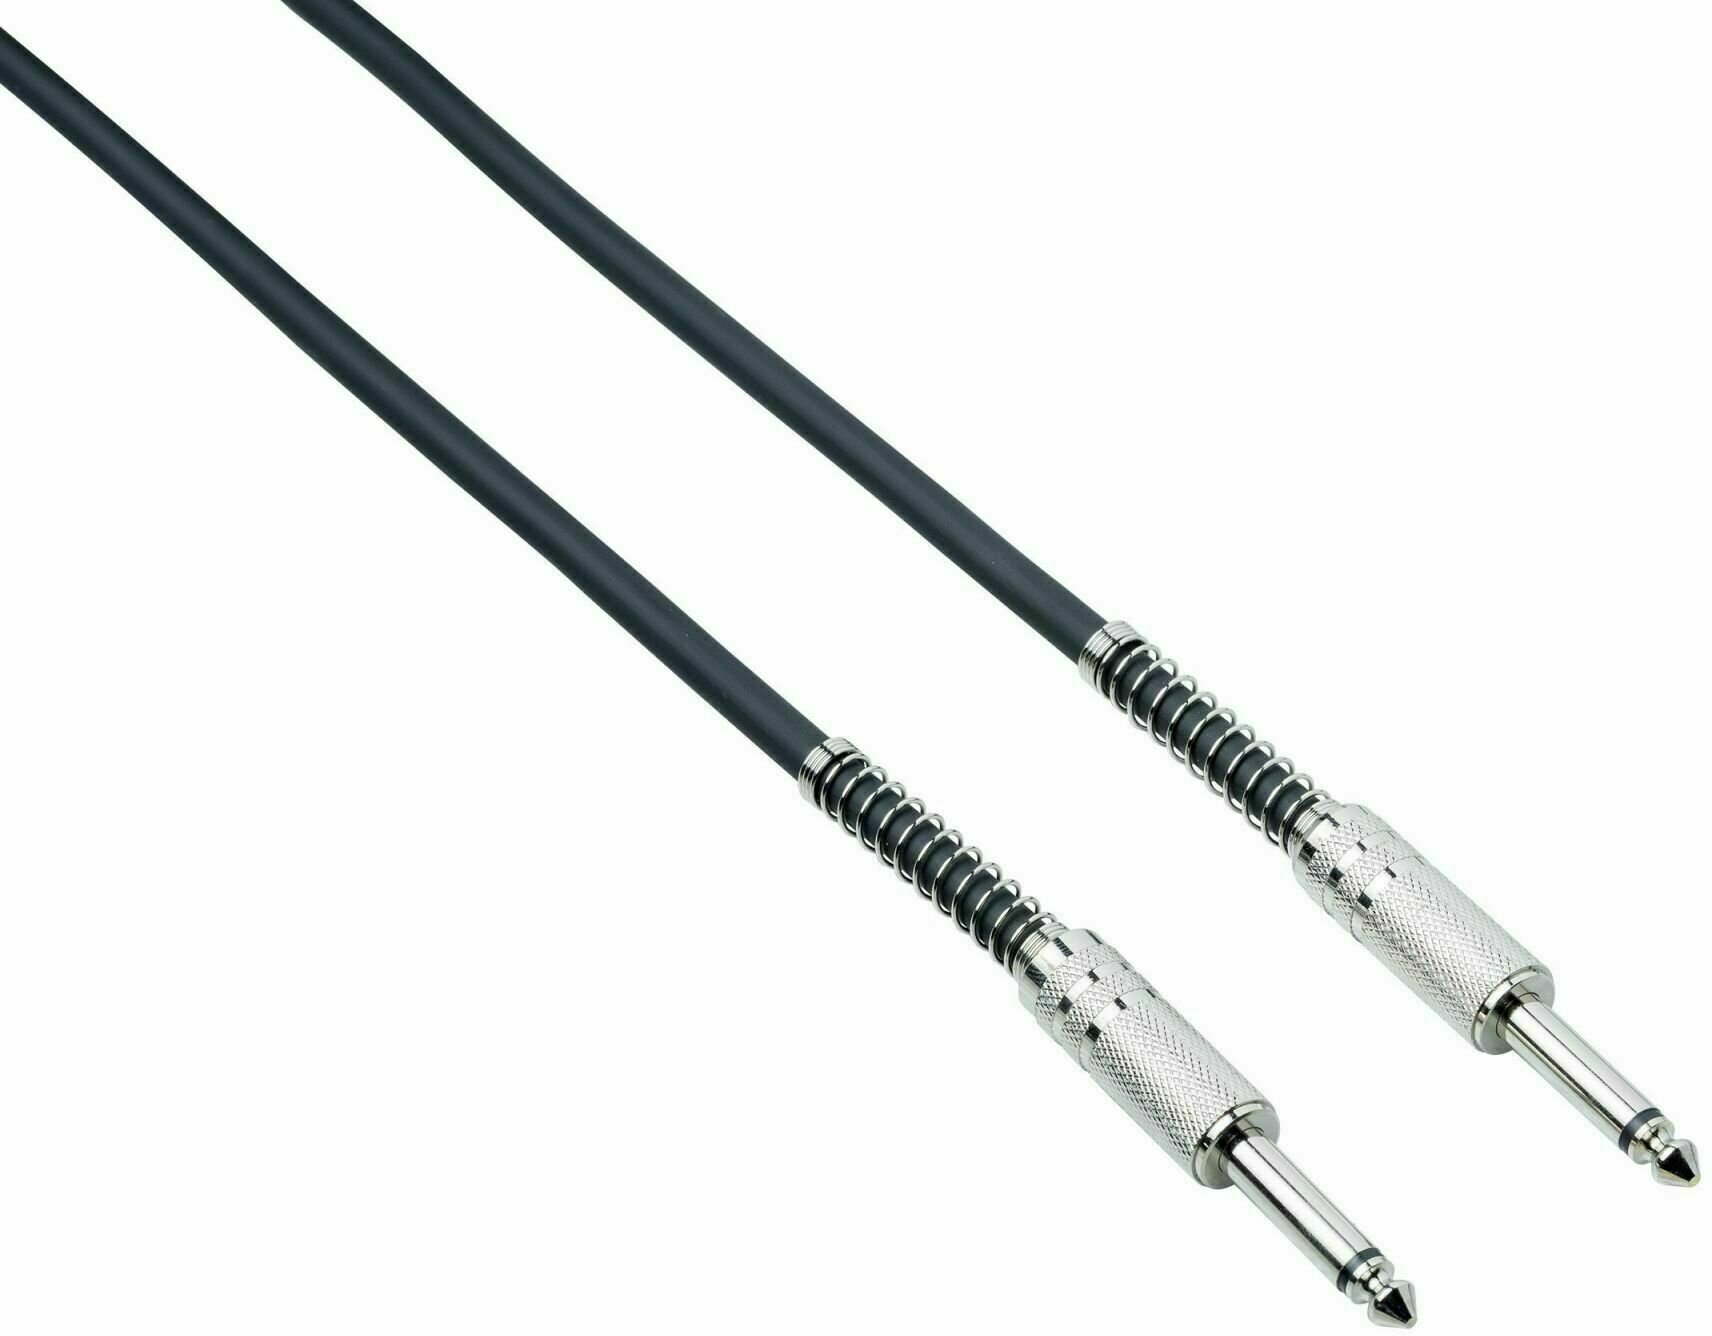 Adapter/Patch Cable Bespeco IRO 50 Black 50 cm Straight - Straight